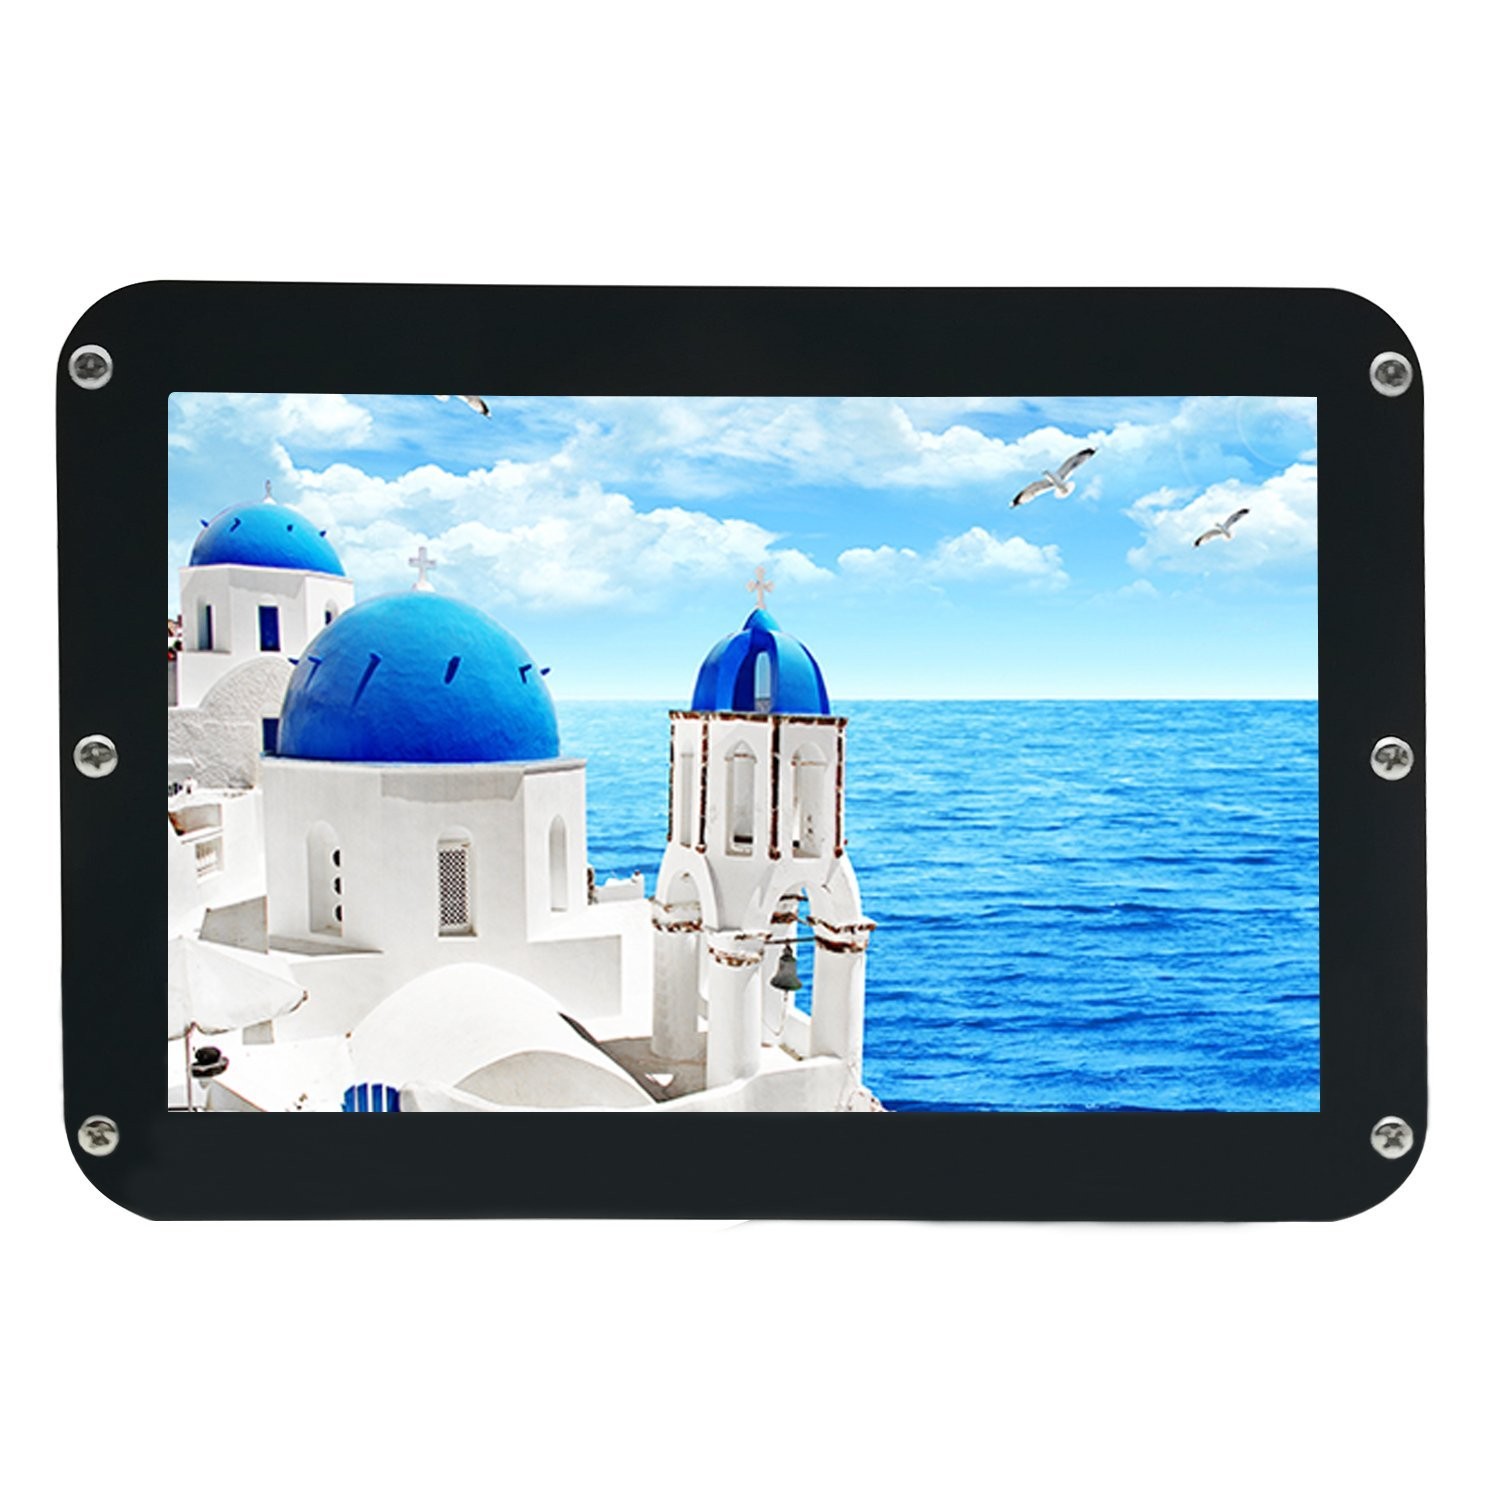 8 Inch IPS 1280x800 Resolutions DIY HDMI Display Screen for Raspberry Pi 3 SKD Display LCD Monitor With PMMA Housing and Micro USB Input Power Source